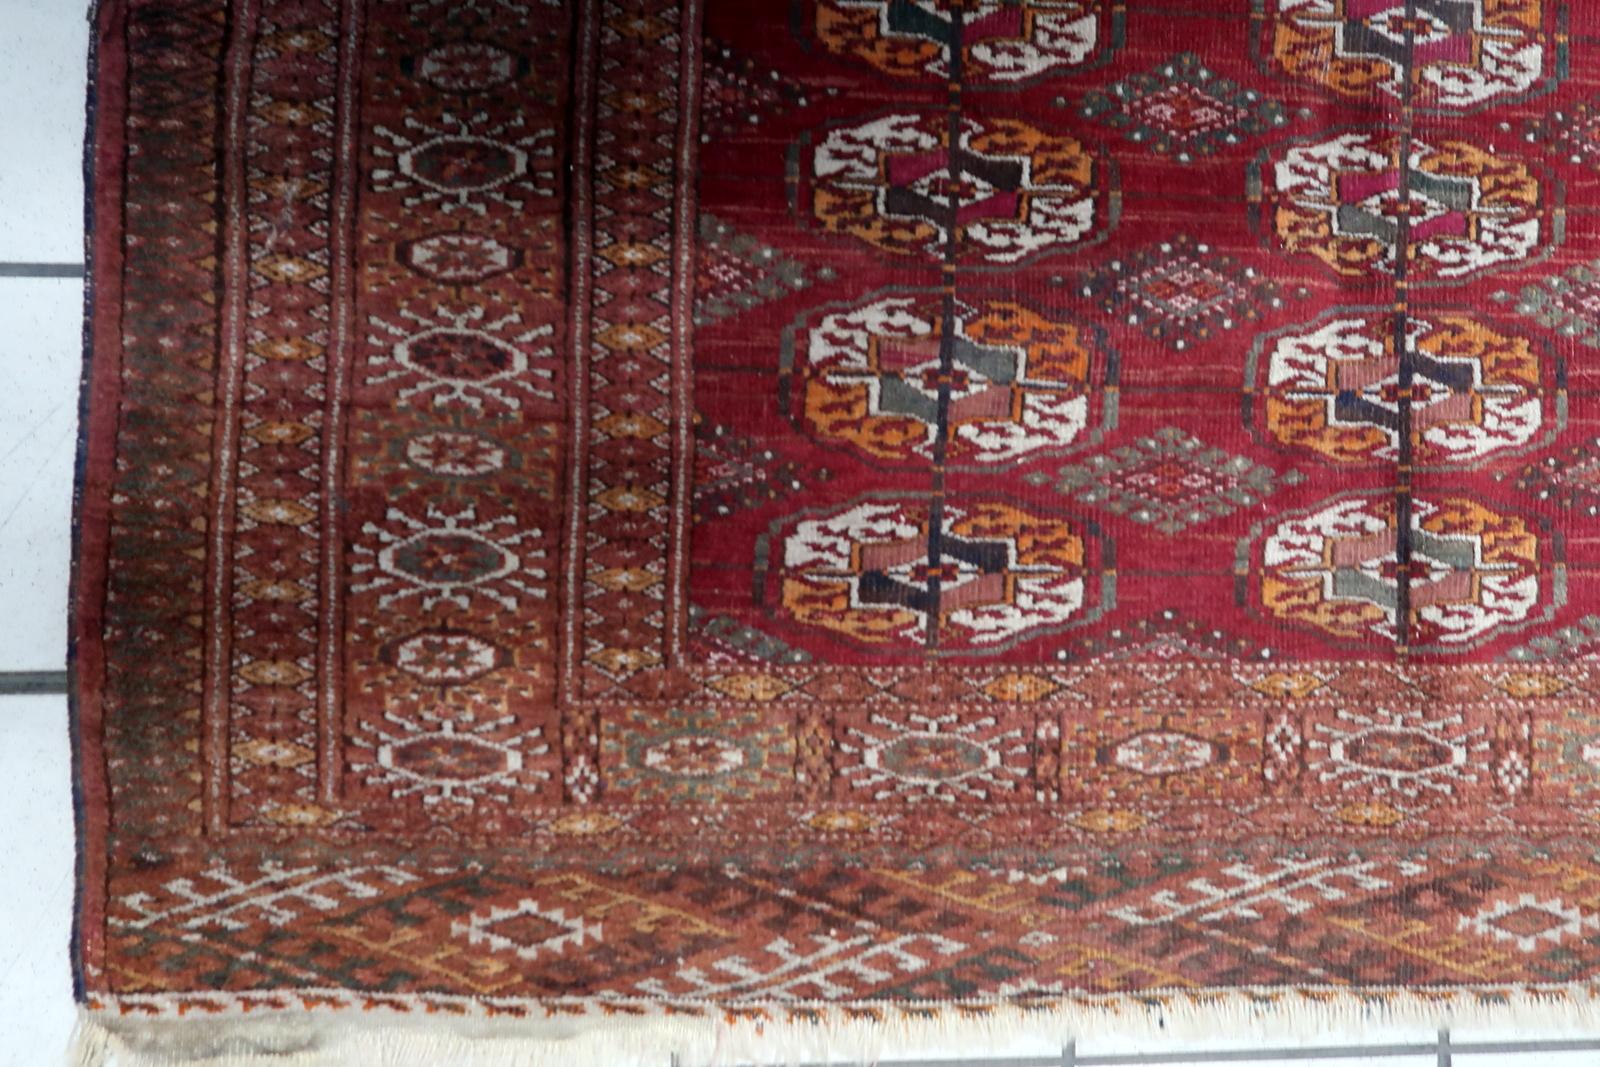 Introducing our exquisite Handmade Vintage Uzbek Bukhara Rug from the 1940s. This stunning rug showcases the timeless beauty and artistry of Uzbekistan's weaving tradition.

Measuring 4.1 feet by 6 feet (128cm x 183cm), this rug is the perfect size